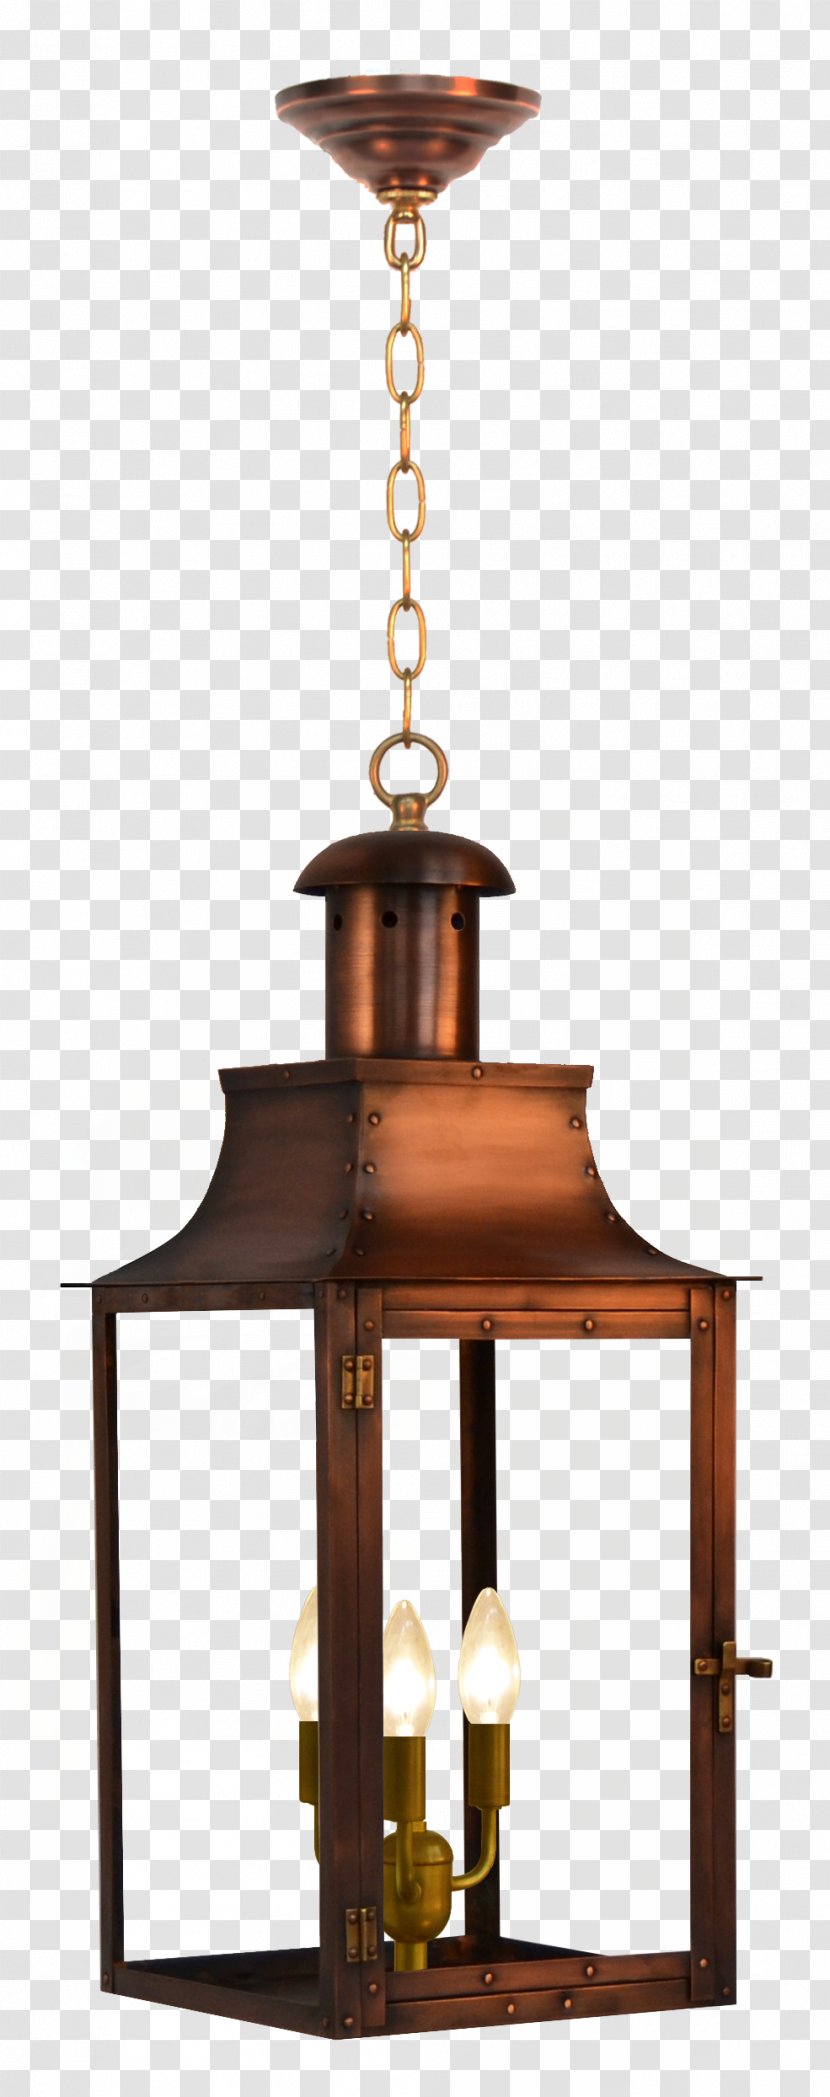 Incandescent Light Bulb Lantern Lamp Coppersmith - Electricity - In Kind Transparent PNG